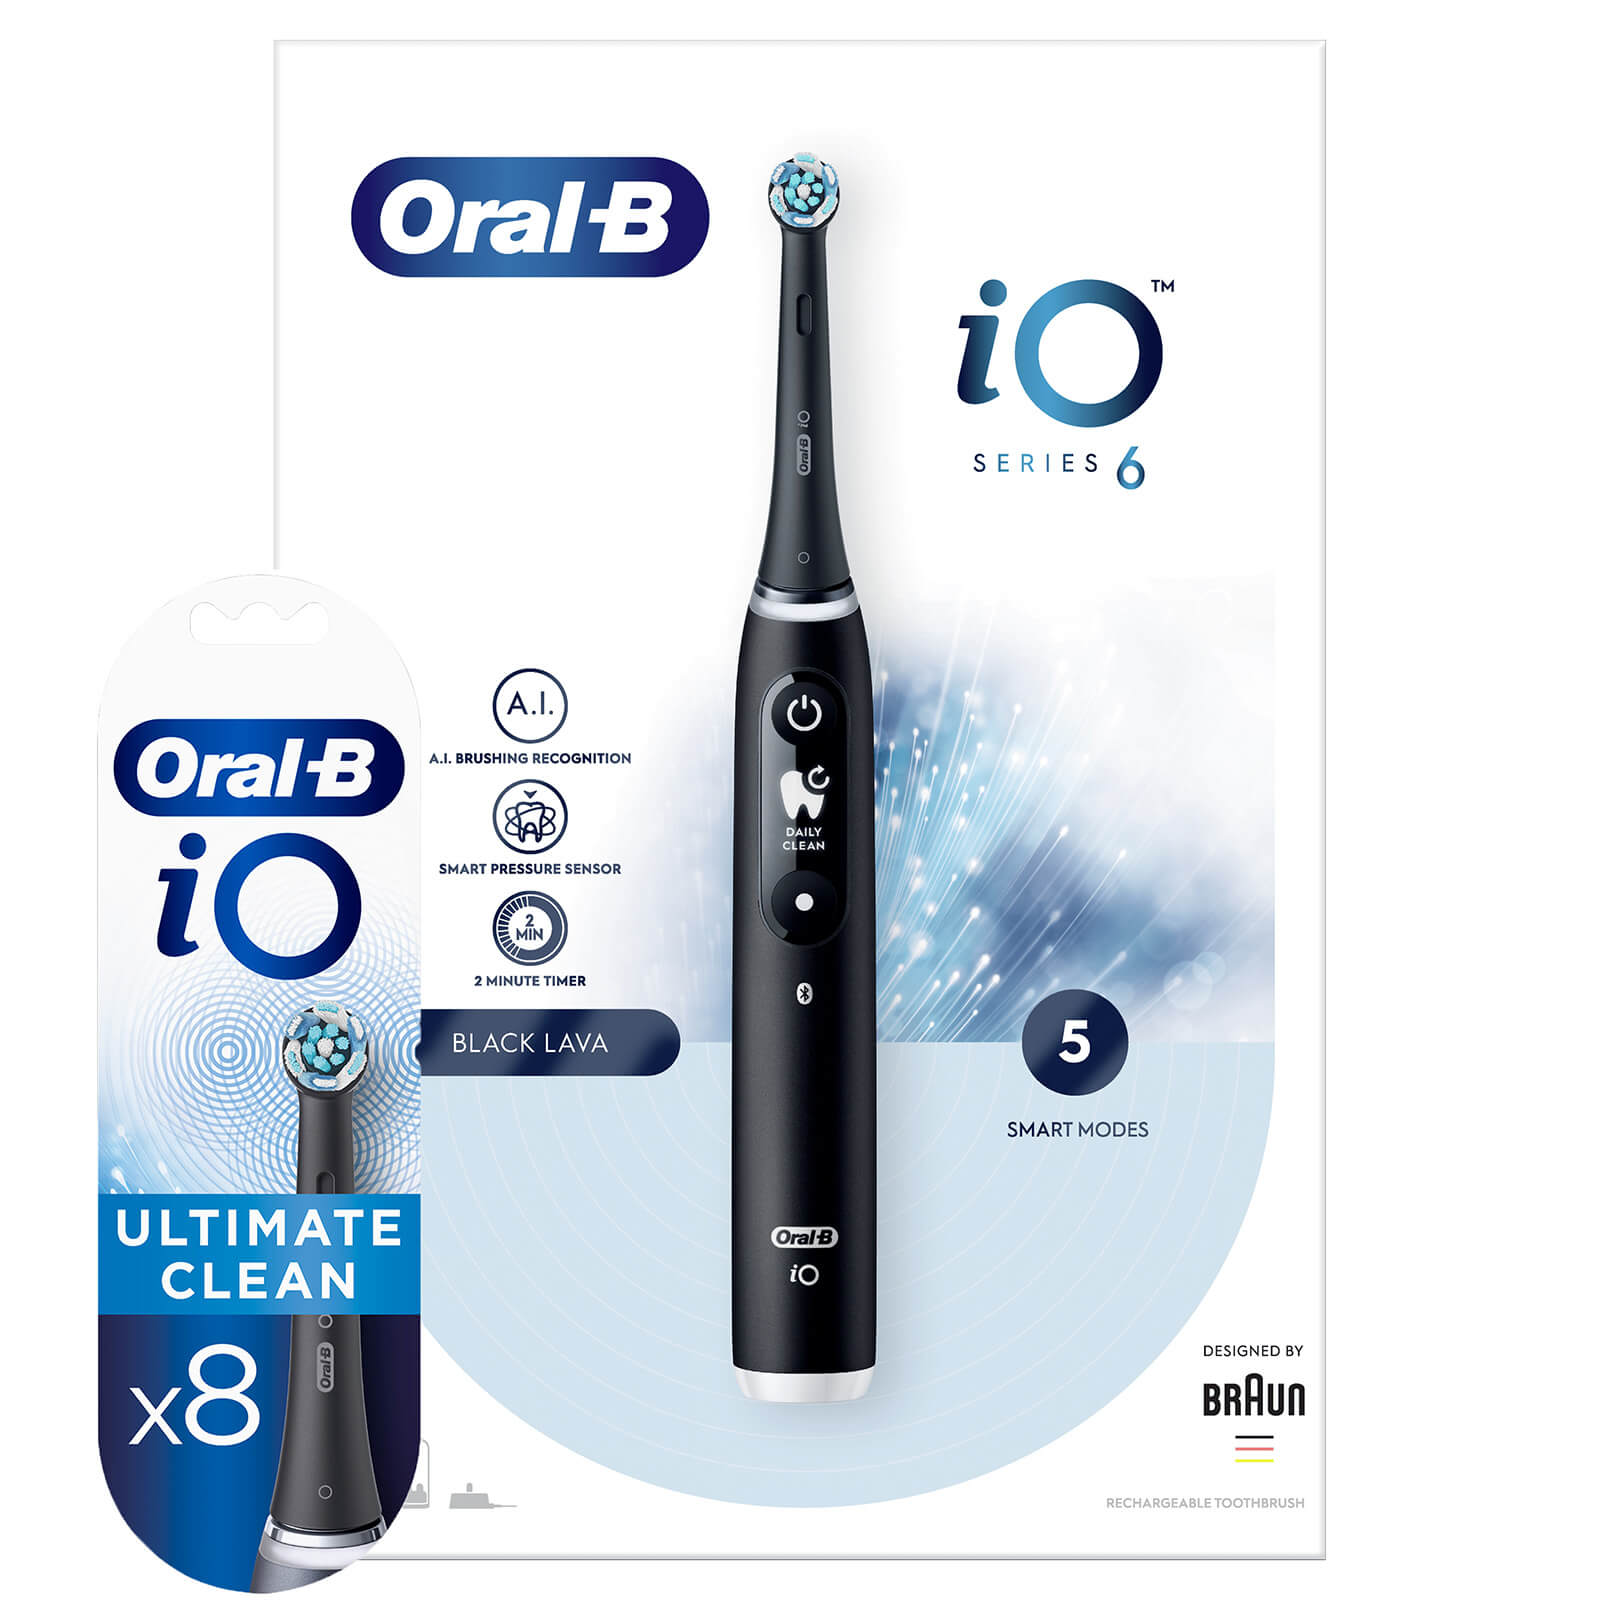 Oral B iO6 Black Lava Electric Toothbrush with Travel Case - Toothbrush + 8 Refills